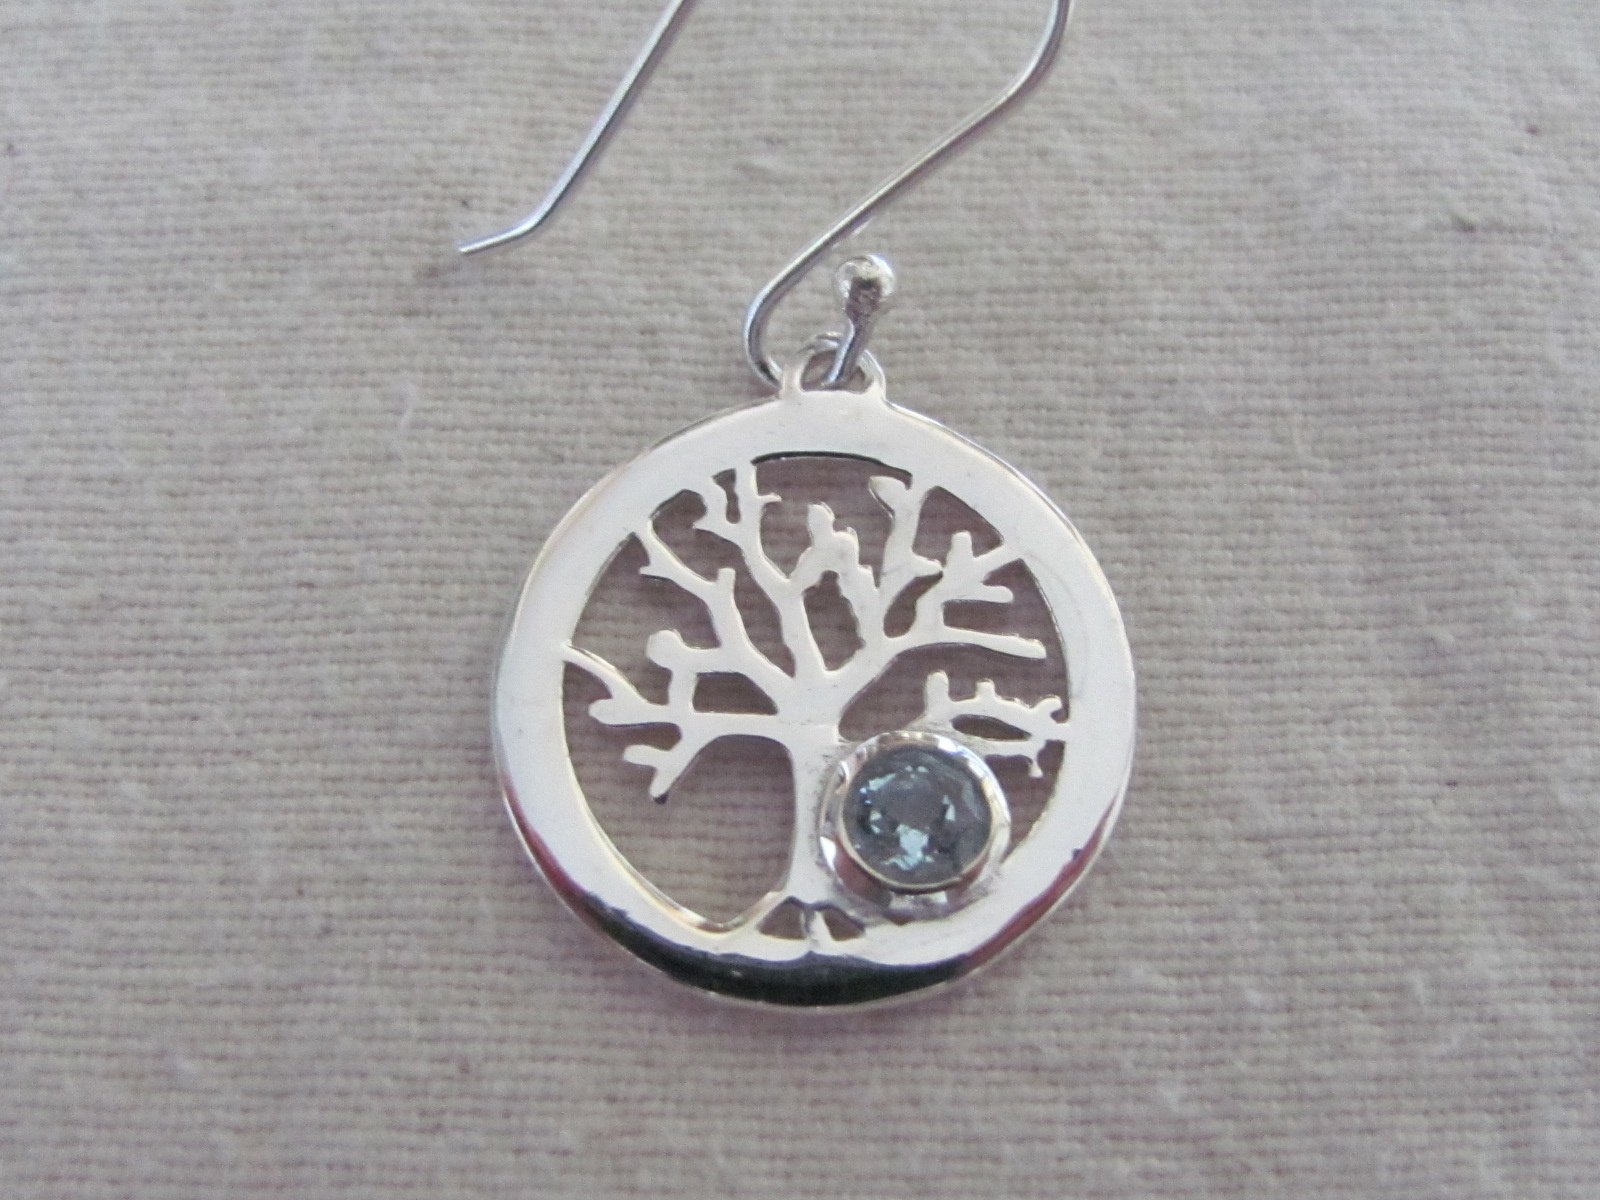 Earring silver tree of life with blue topas